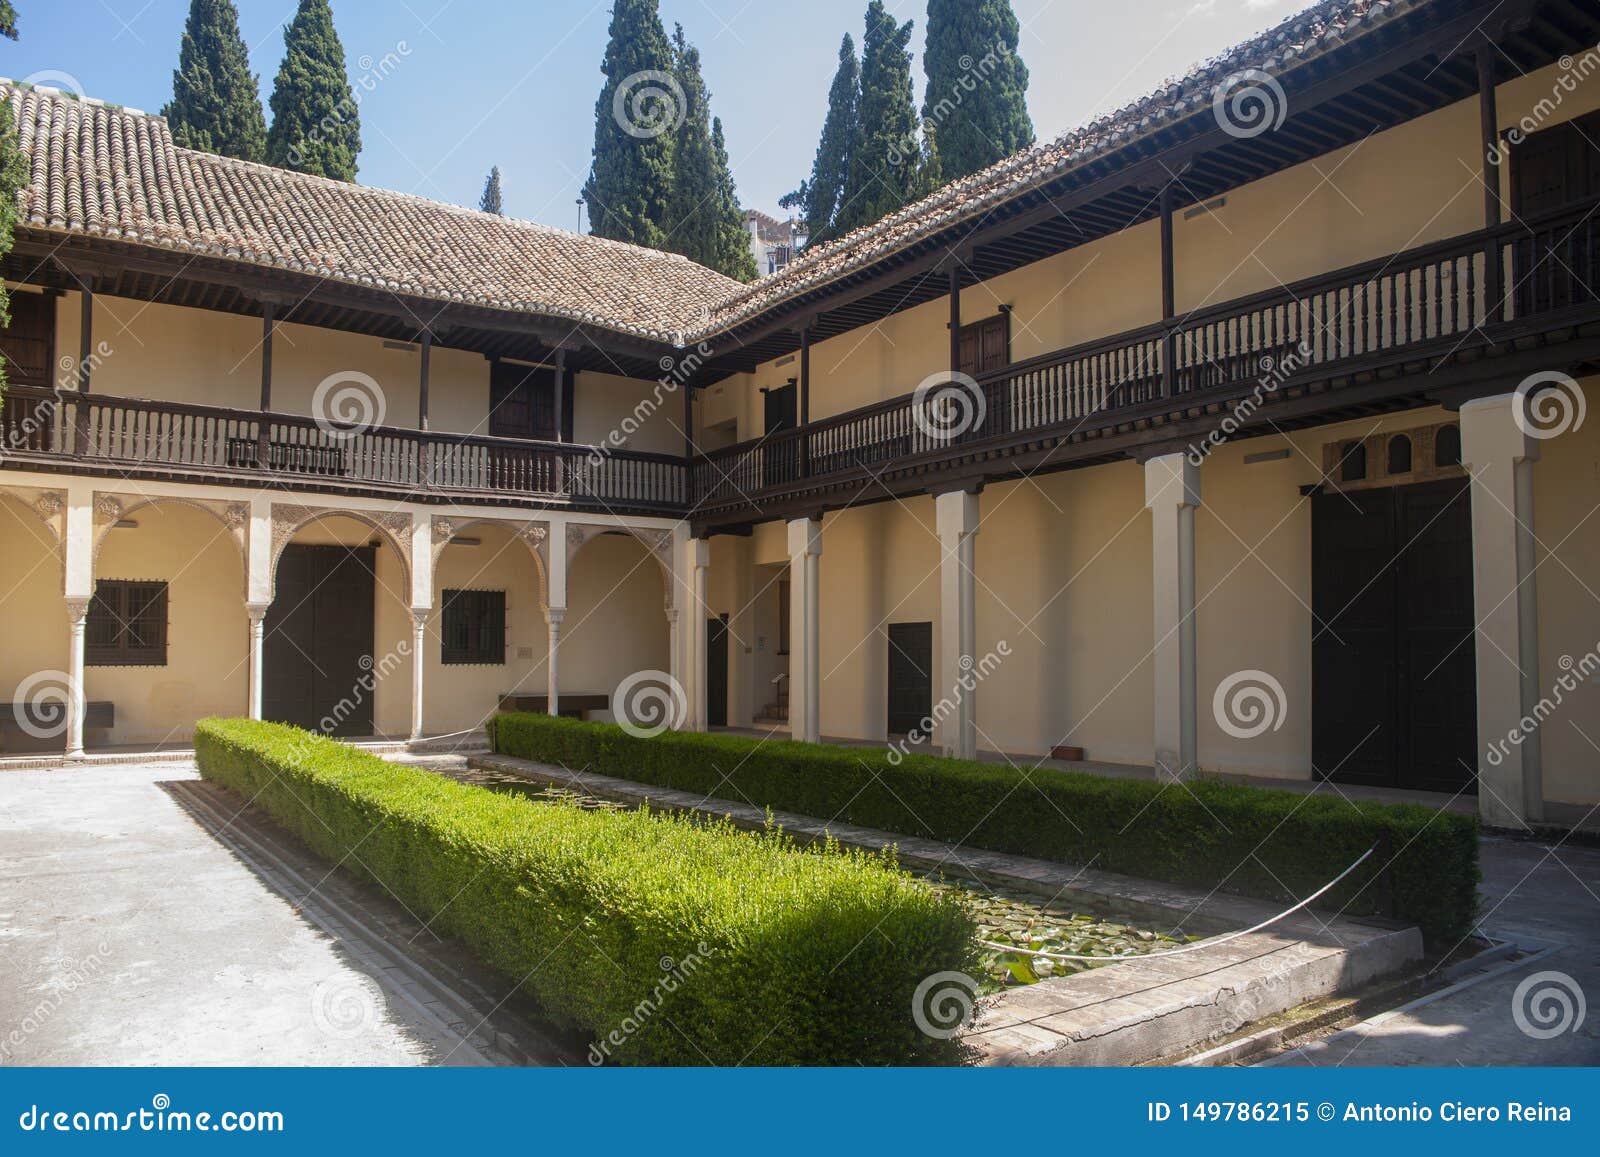 the house of the chapiz in granada, andalusia